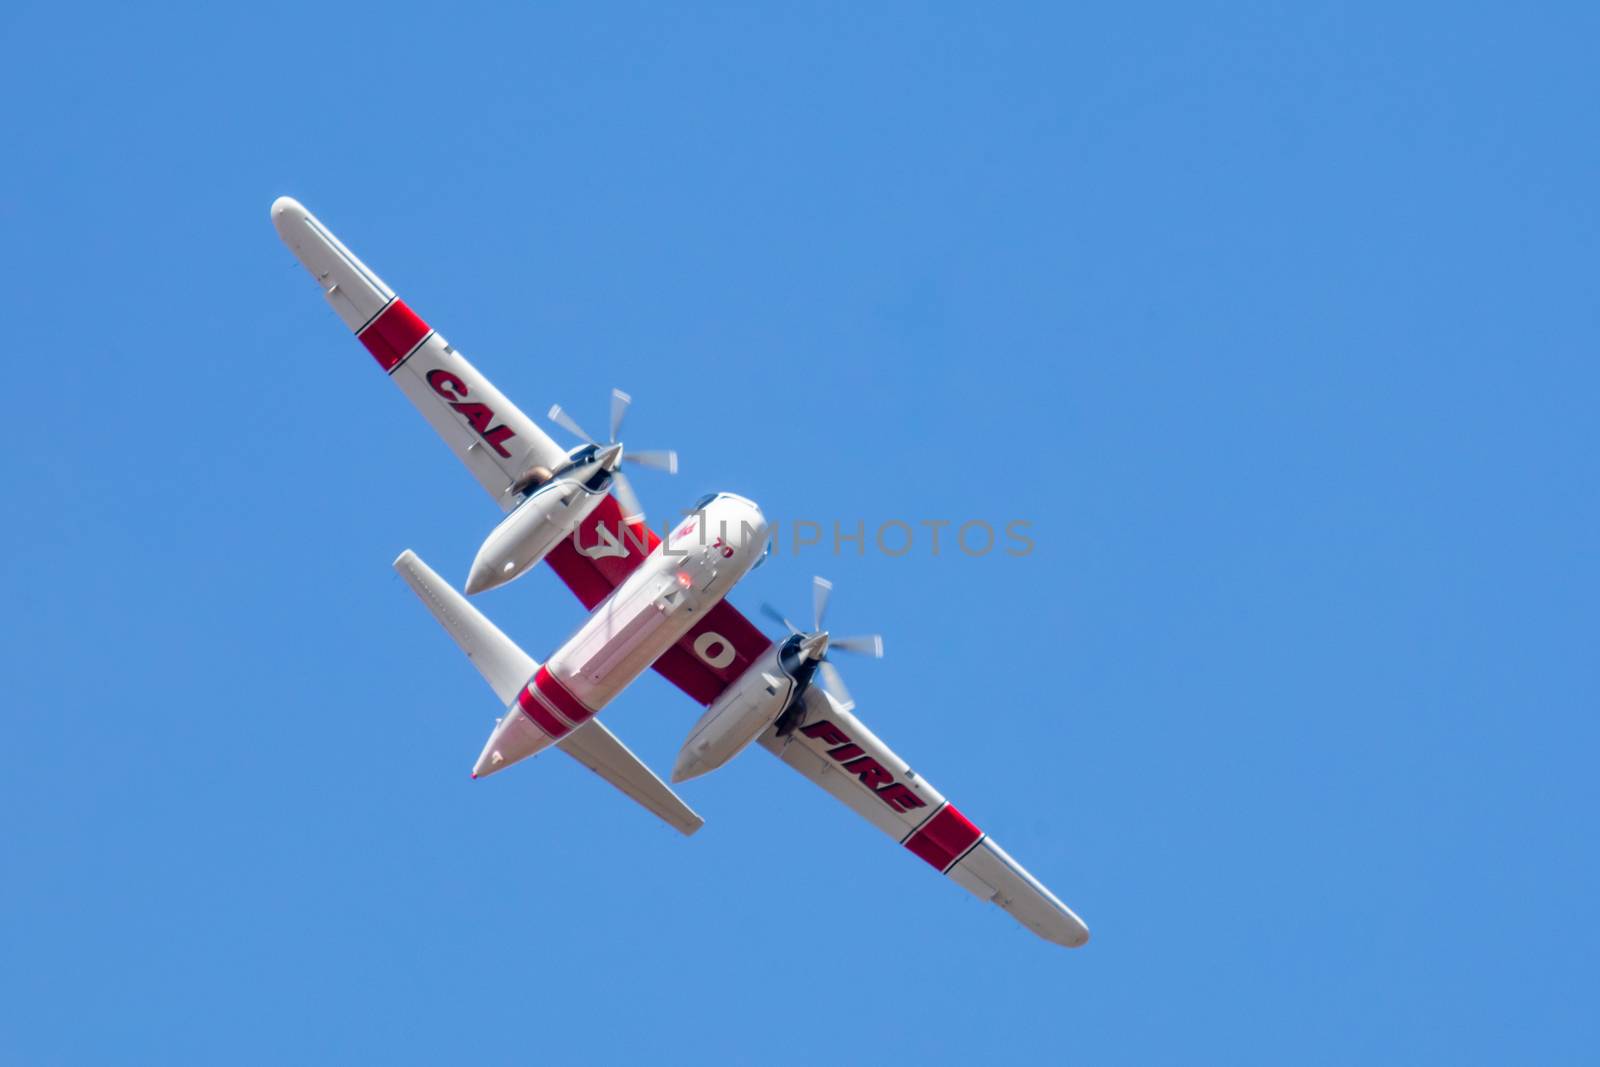 Winchester, CA USA - June 14, 2020: Cal Fire aircraft preparingto drop fire retardant on a dry hilltop wildfire near Winchester, California. by Feverpitched